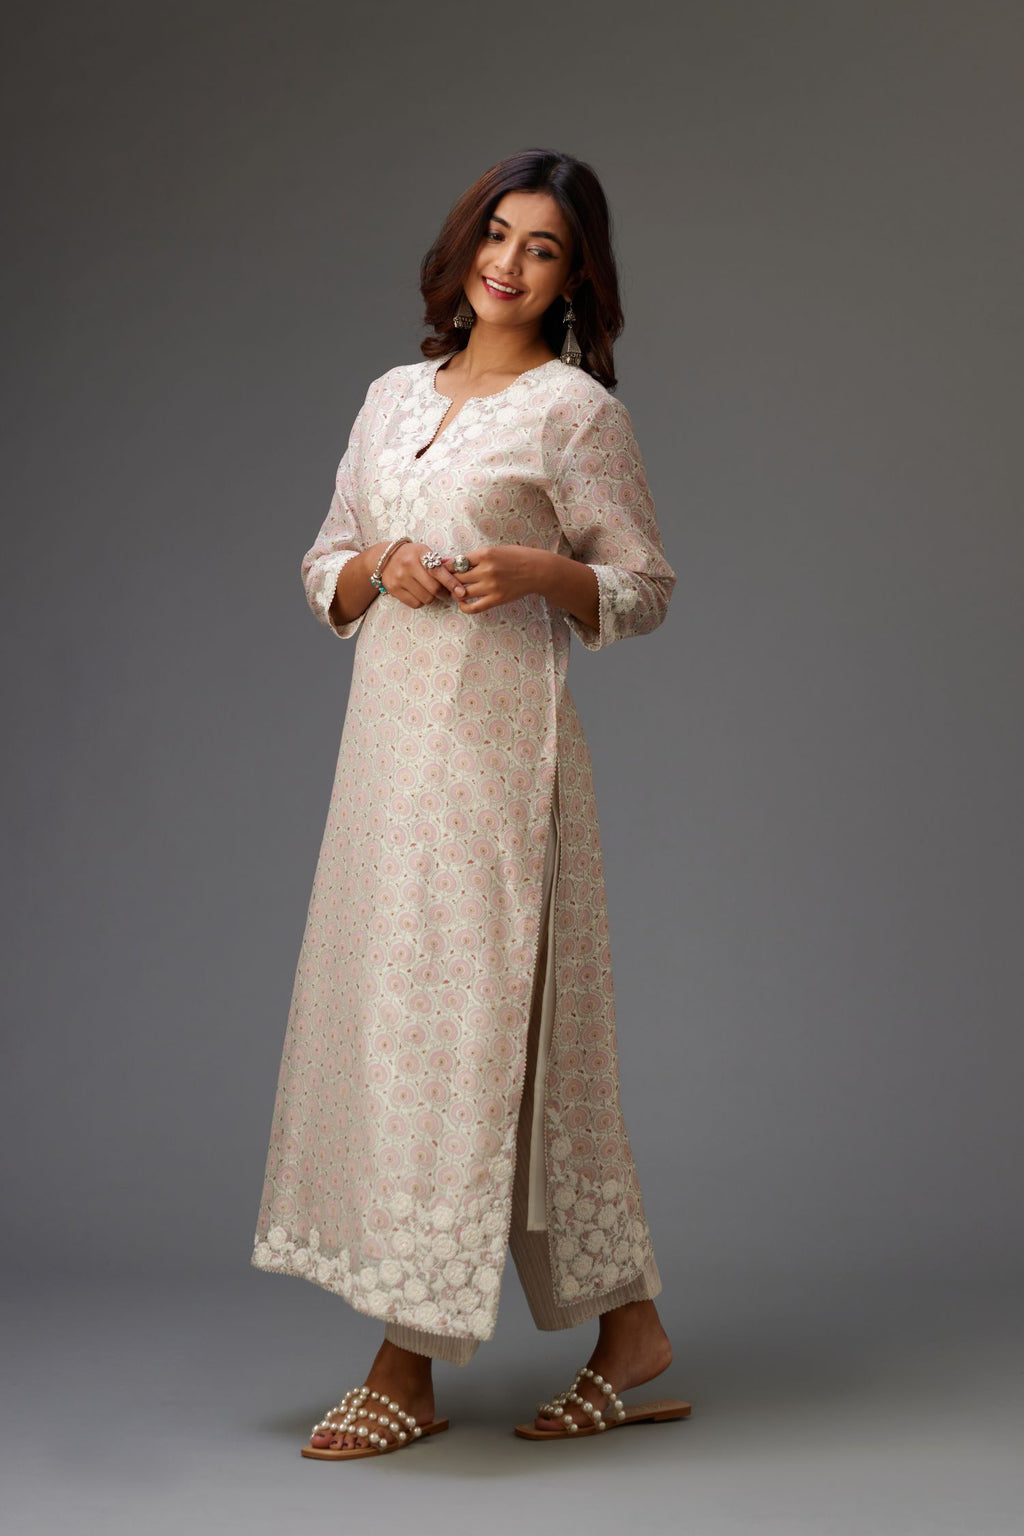 Pink and grey Silk Chanderi hand-block printed kurta set with appliqué embroidery, highlighted with lace and sequins.